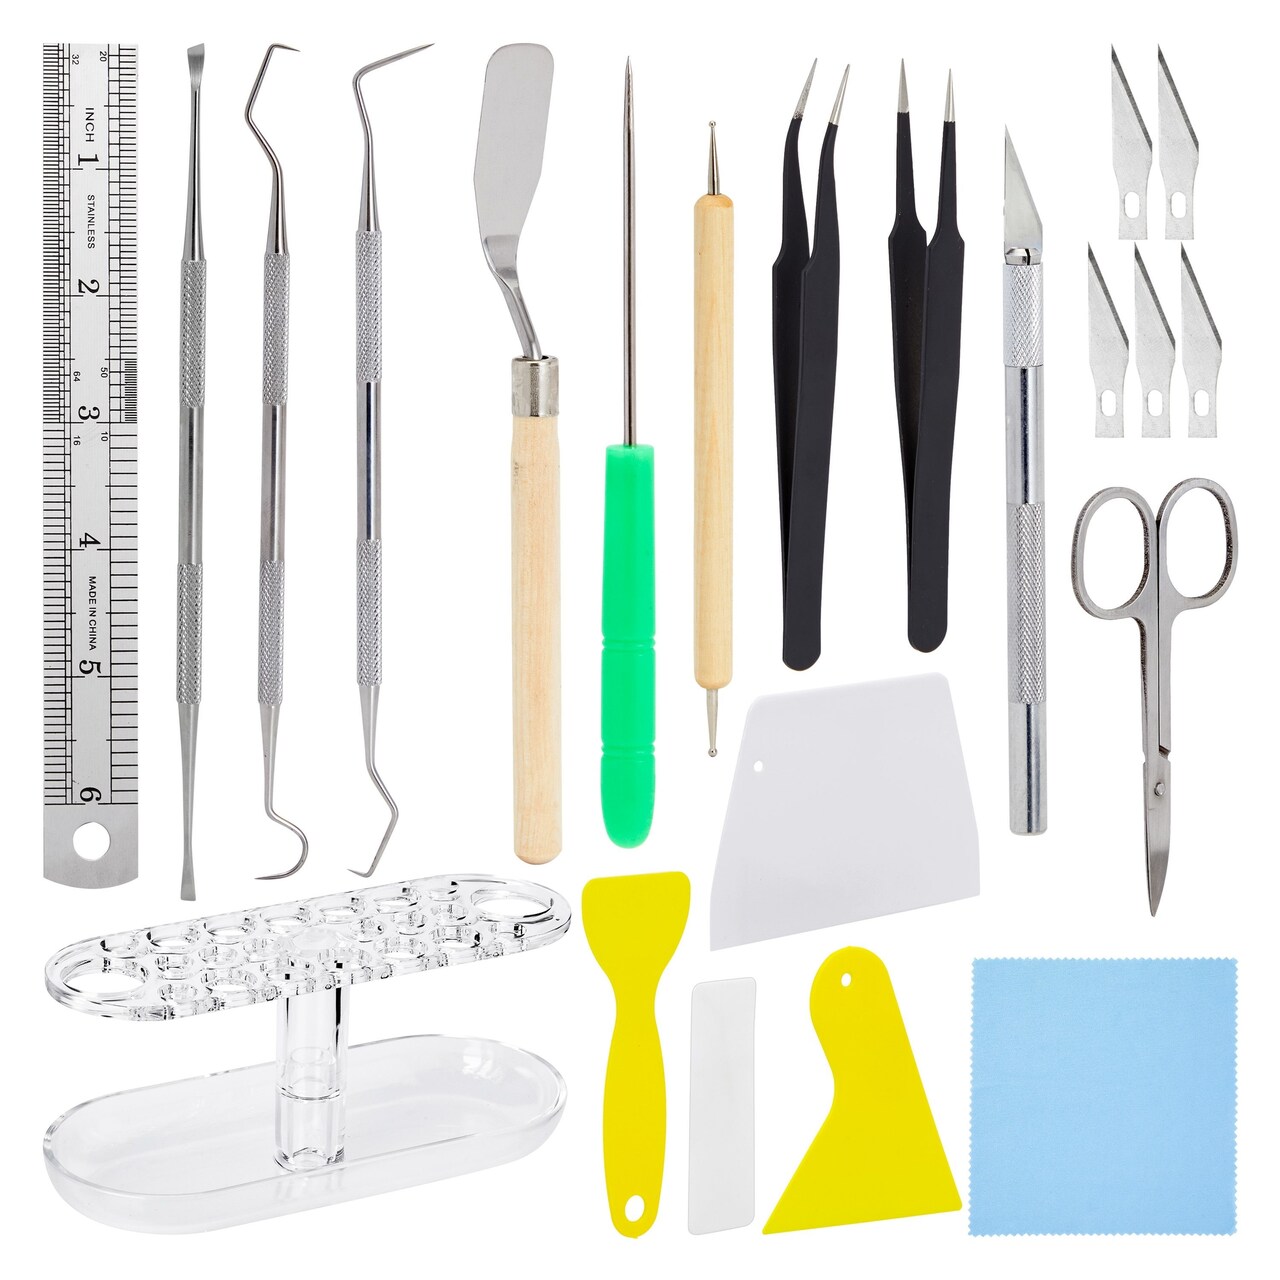 Craft Weeding Tools for Vinyl, 22-Piece Kit with Acrylic Stand